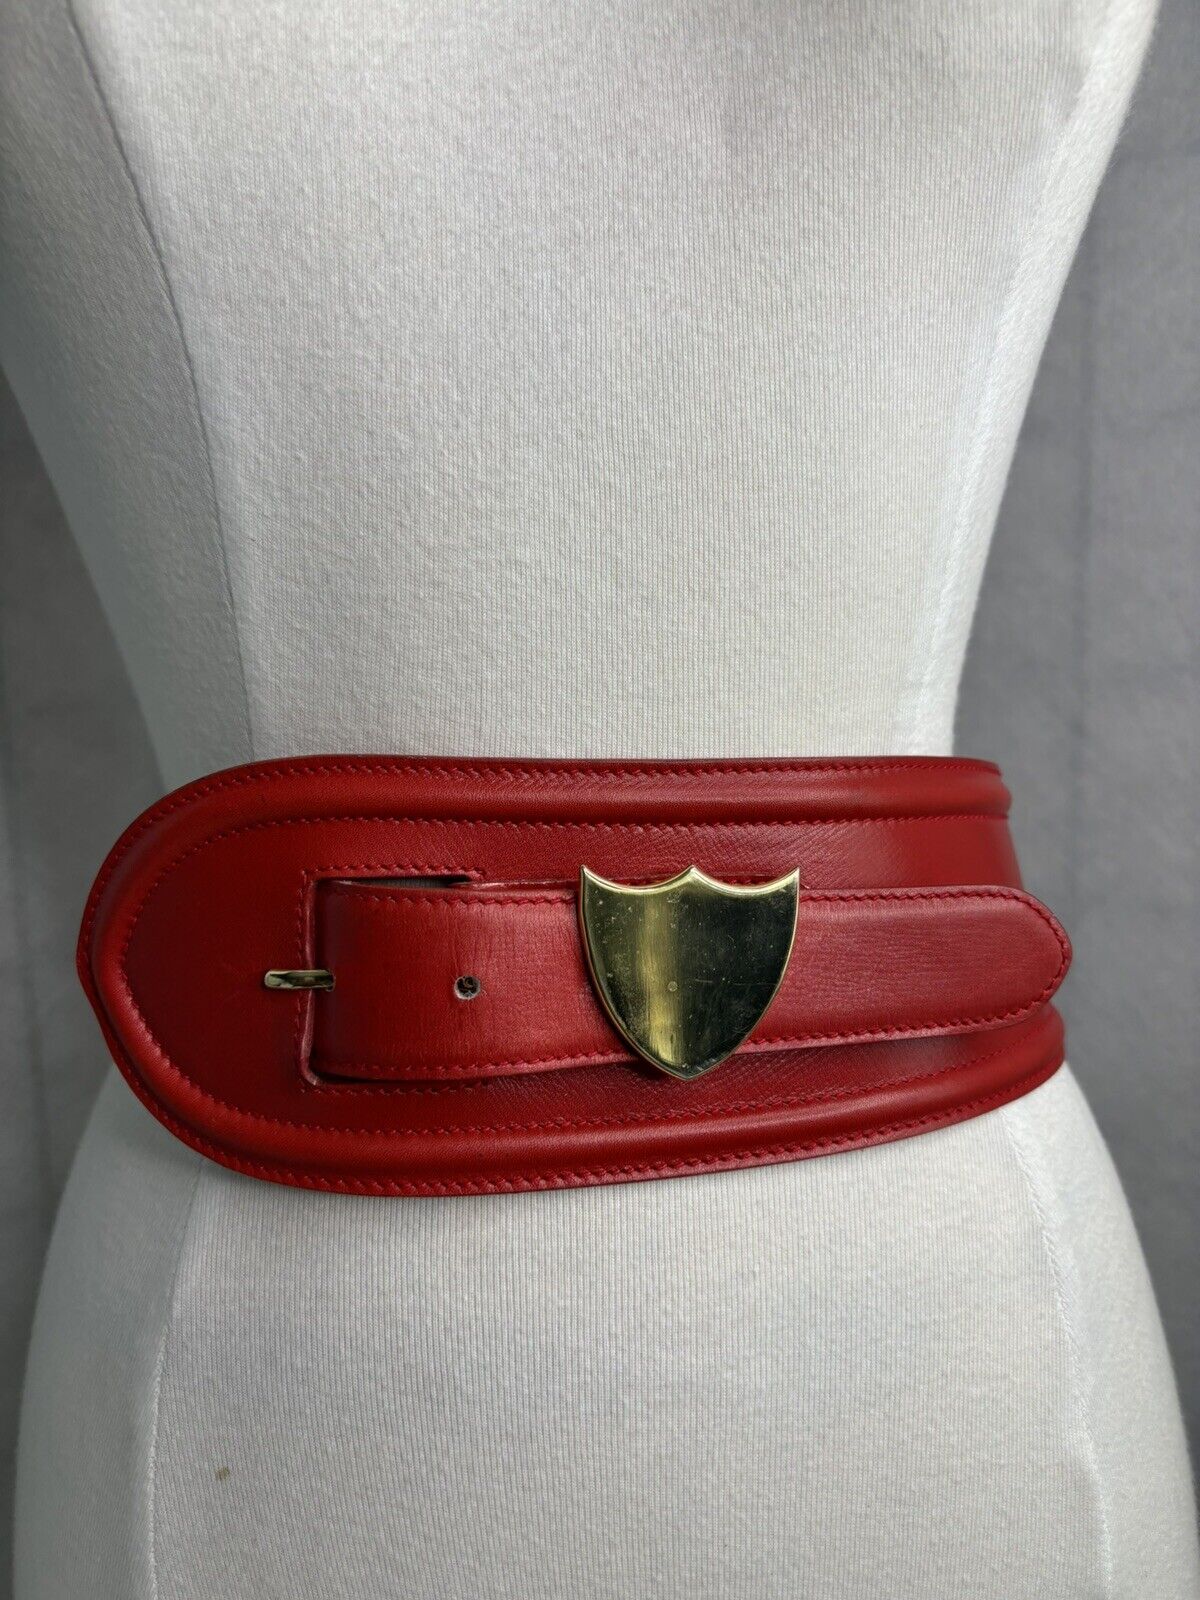 PALOMA PICASSO VINTAGE LEATHER TOMMY BELT RED SMA… - image 1